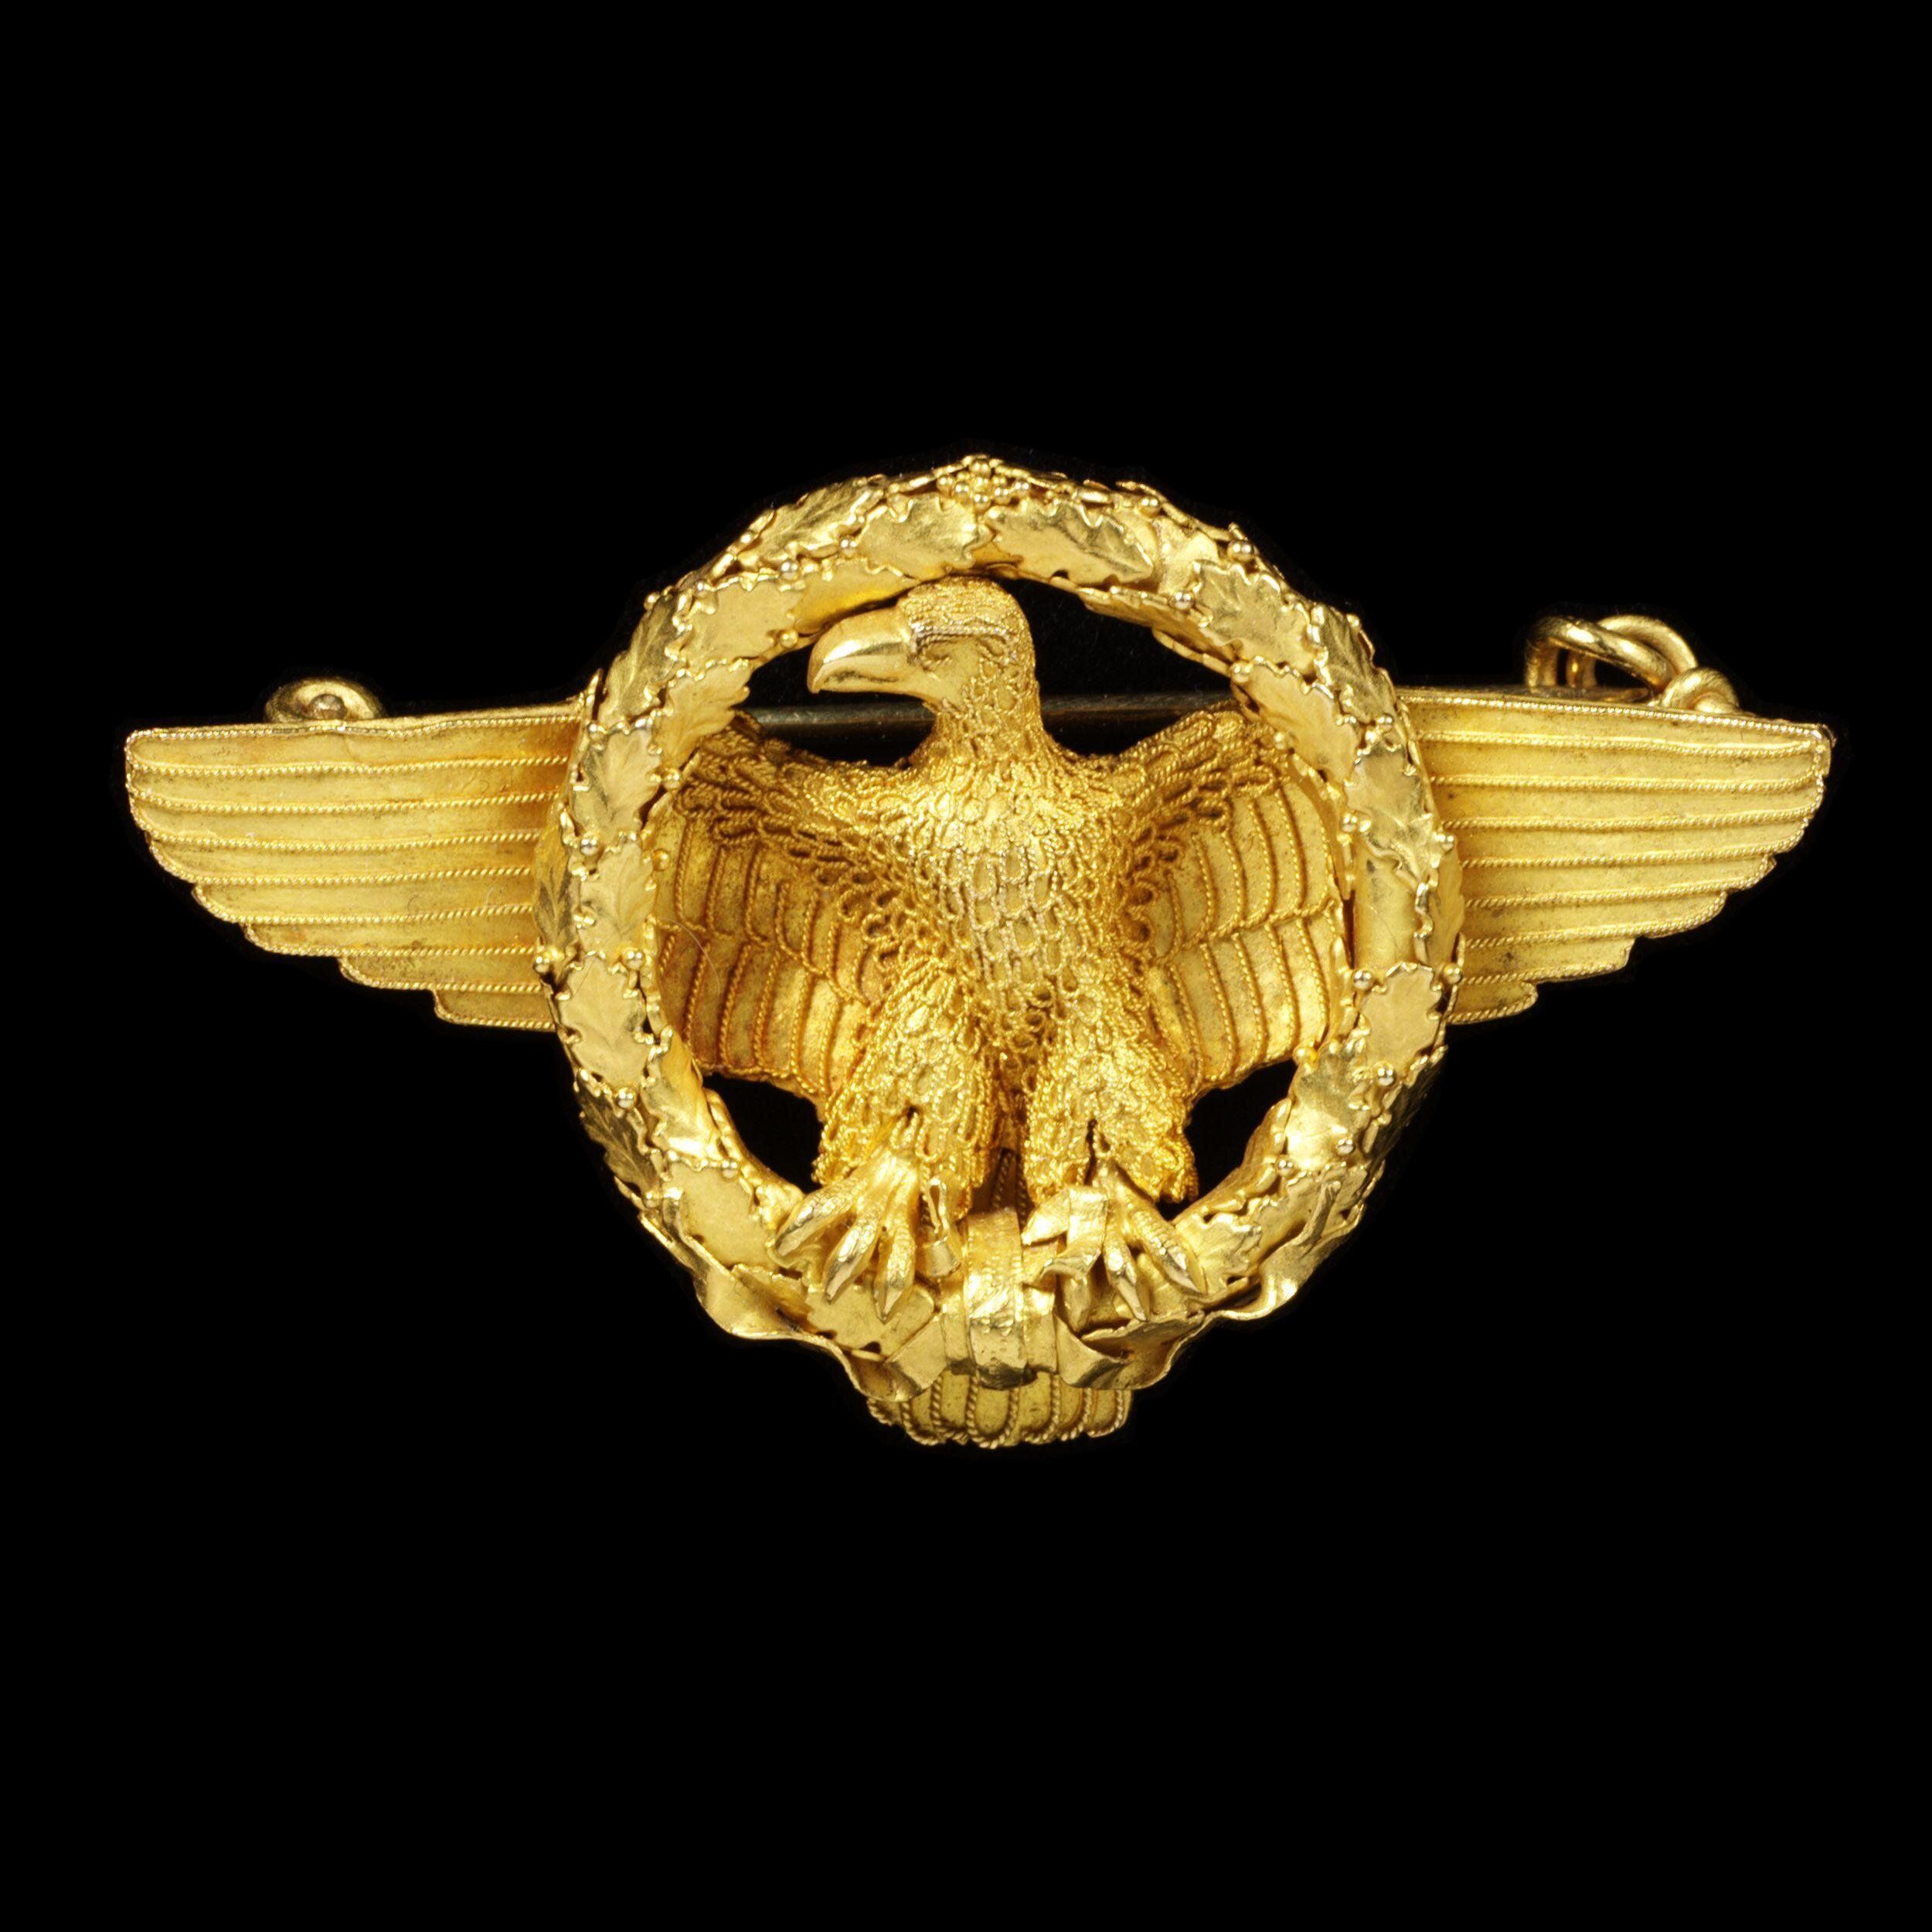 A brooch by Castellani of Rome, the leading firm making jewelry inspired by archaeological finds is in the form of an ensign of a Roman legion. Each legion carried a standard which took the form of an eagle. The loss of the standard was a terrible disgrace. Brooch, 1860. The Victoria & Albert Museum.